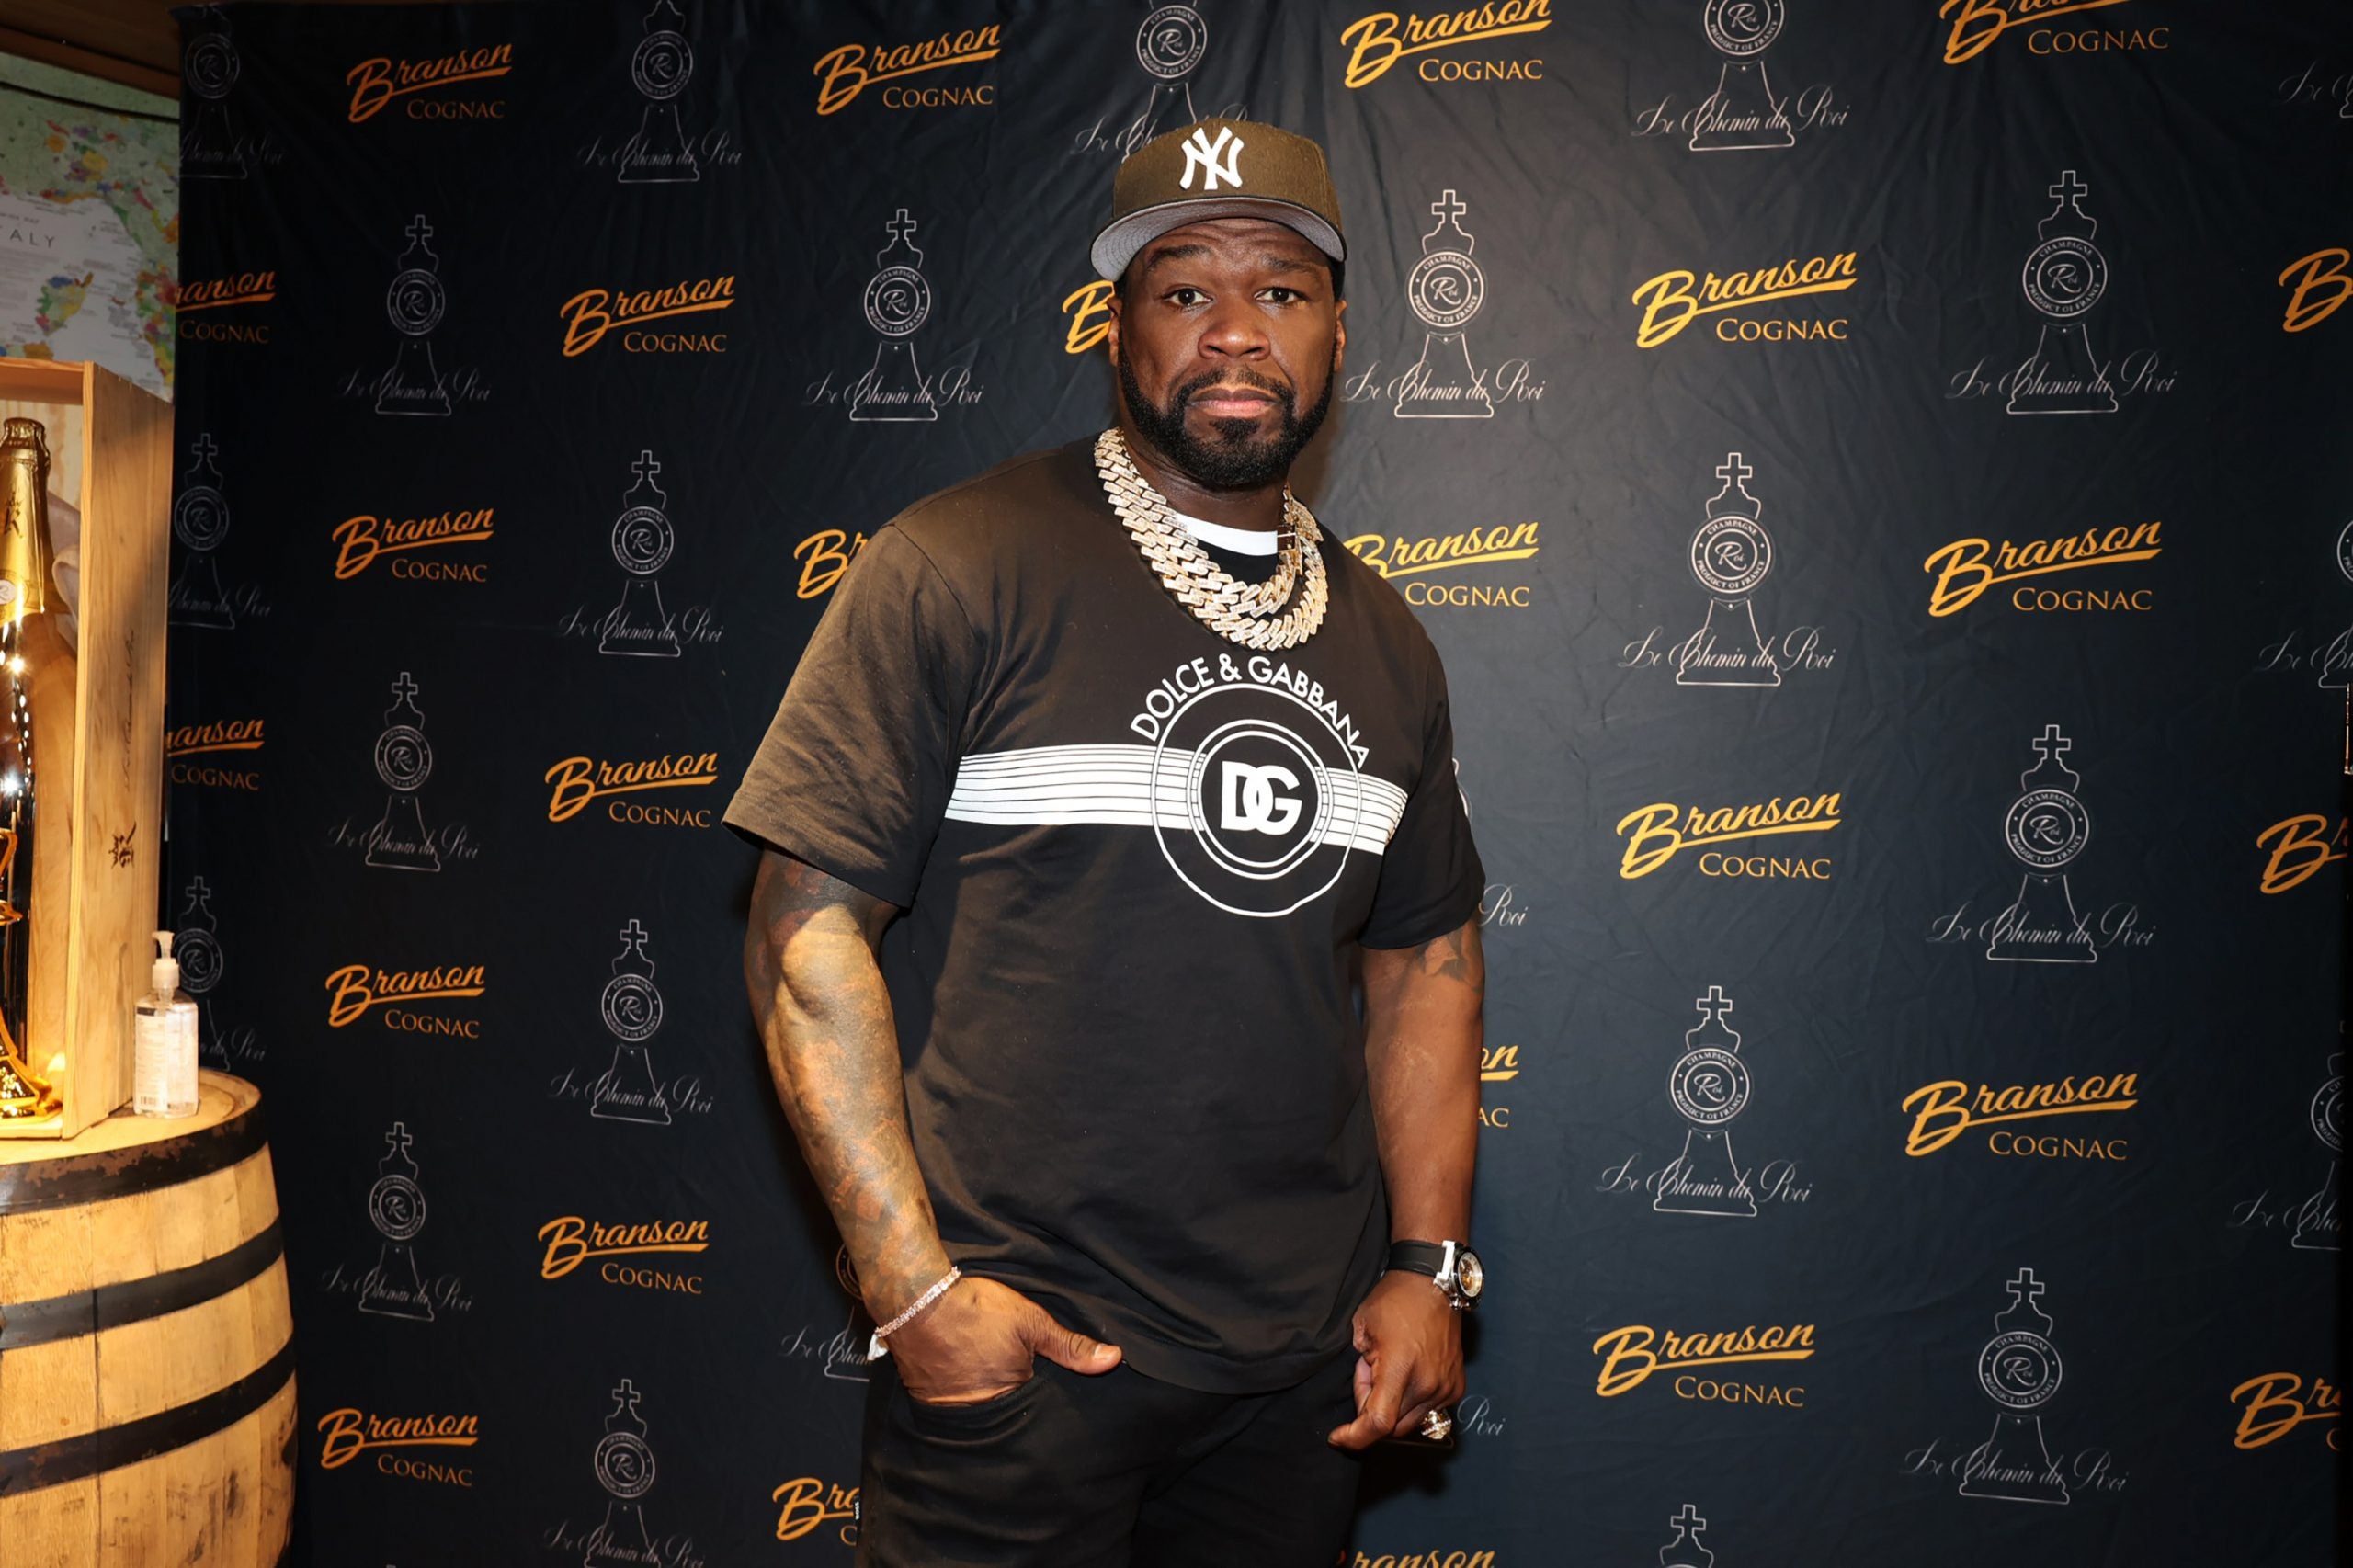 Is 50 Cent Sick? What Happened to 50 Cent? - News